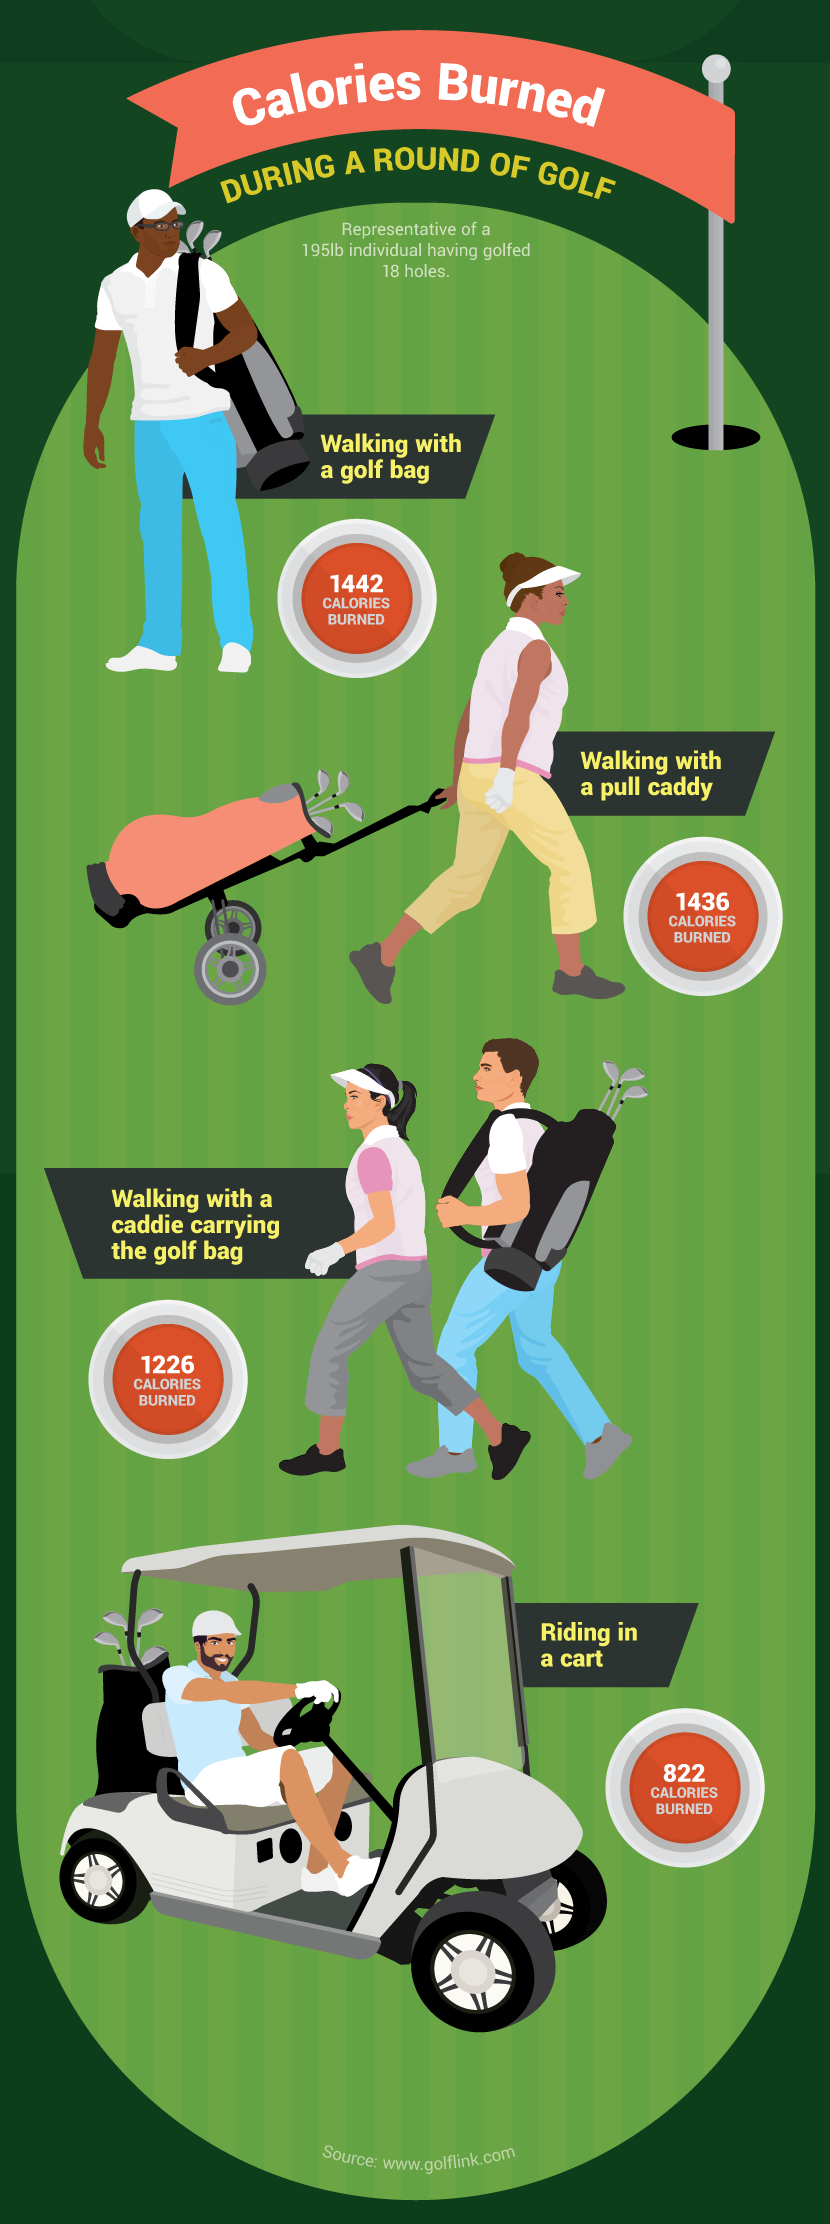 Calories Burned Playing Golf - Golf and Wellness